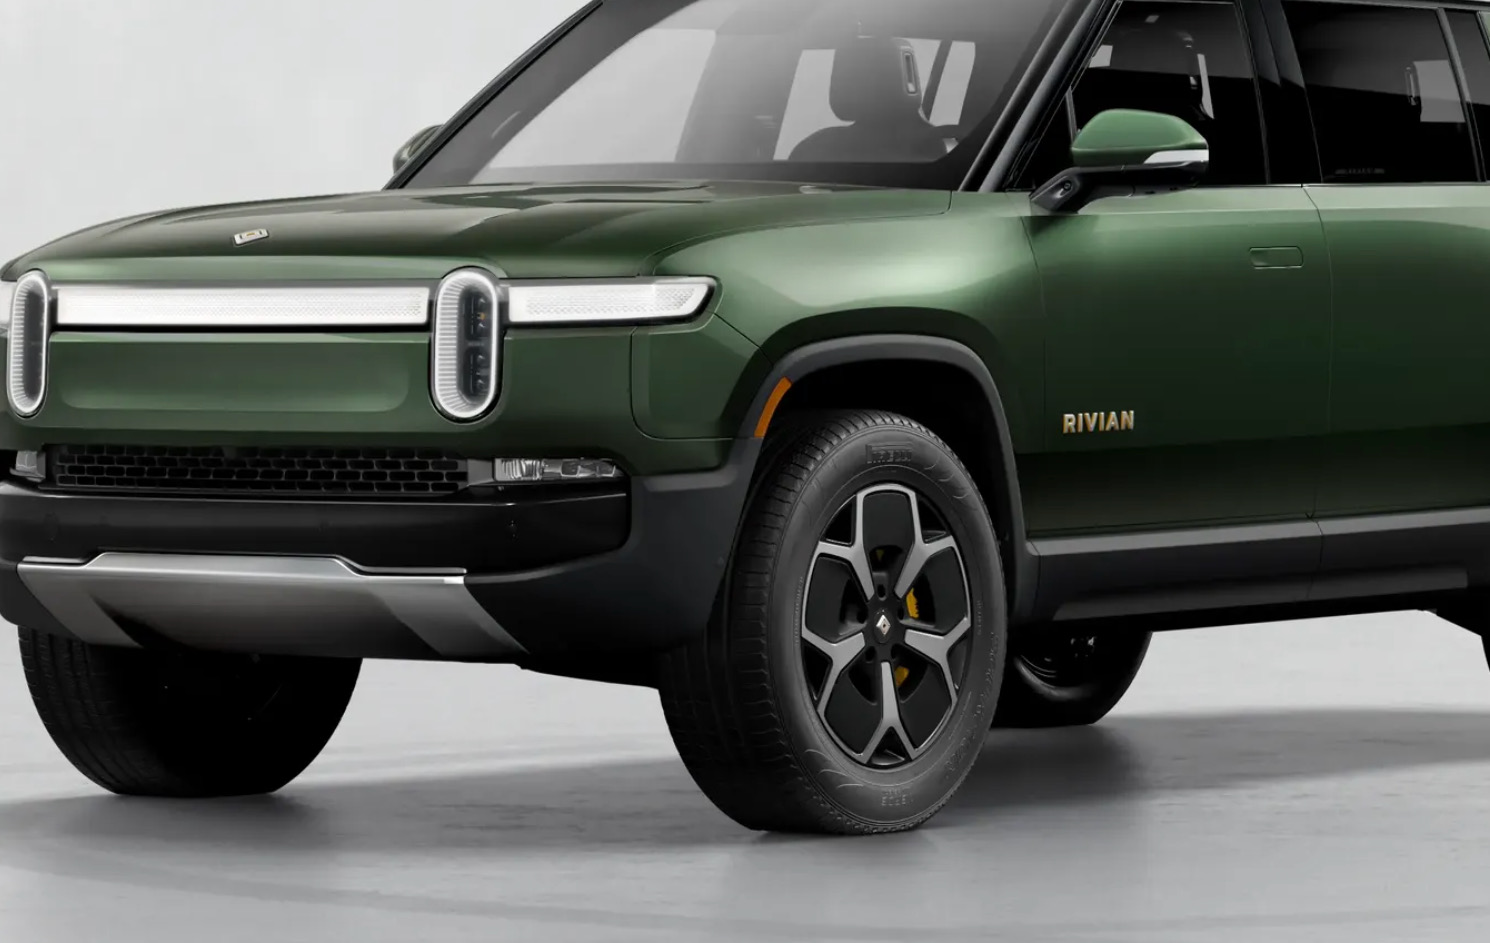 Ford ditches plan to co-develop new electric vehicles with Rivian